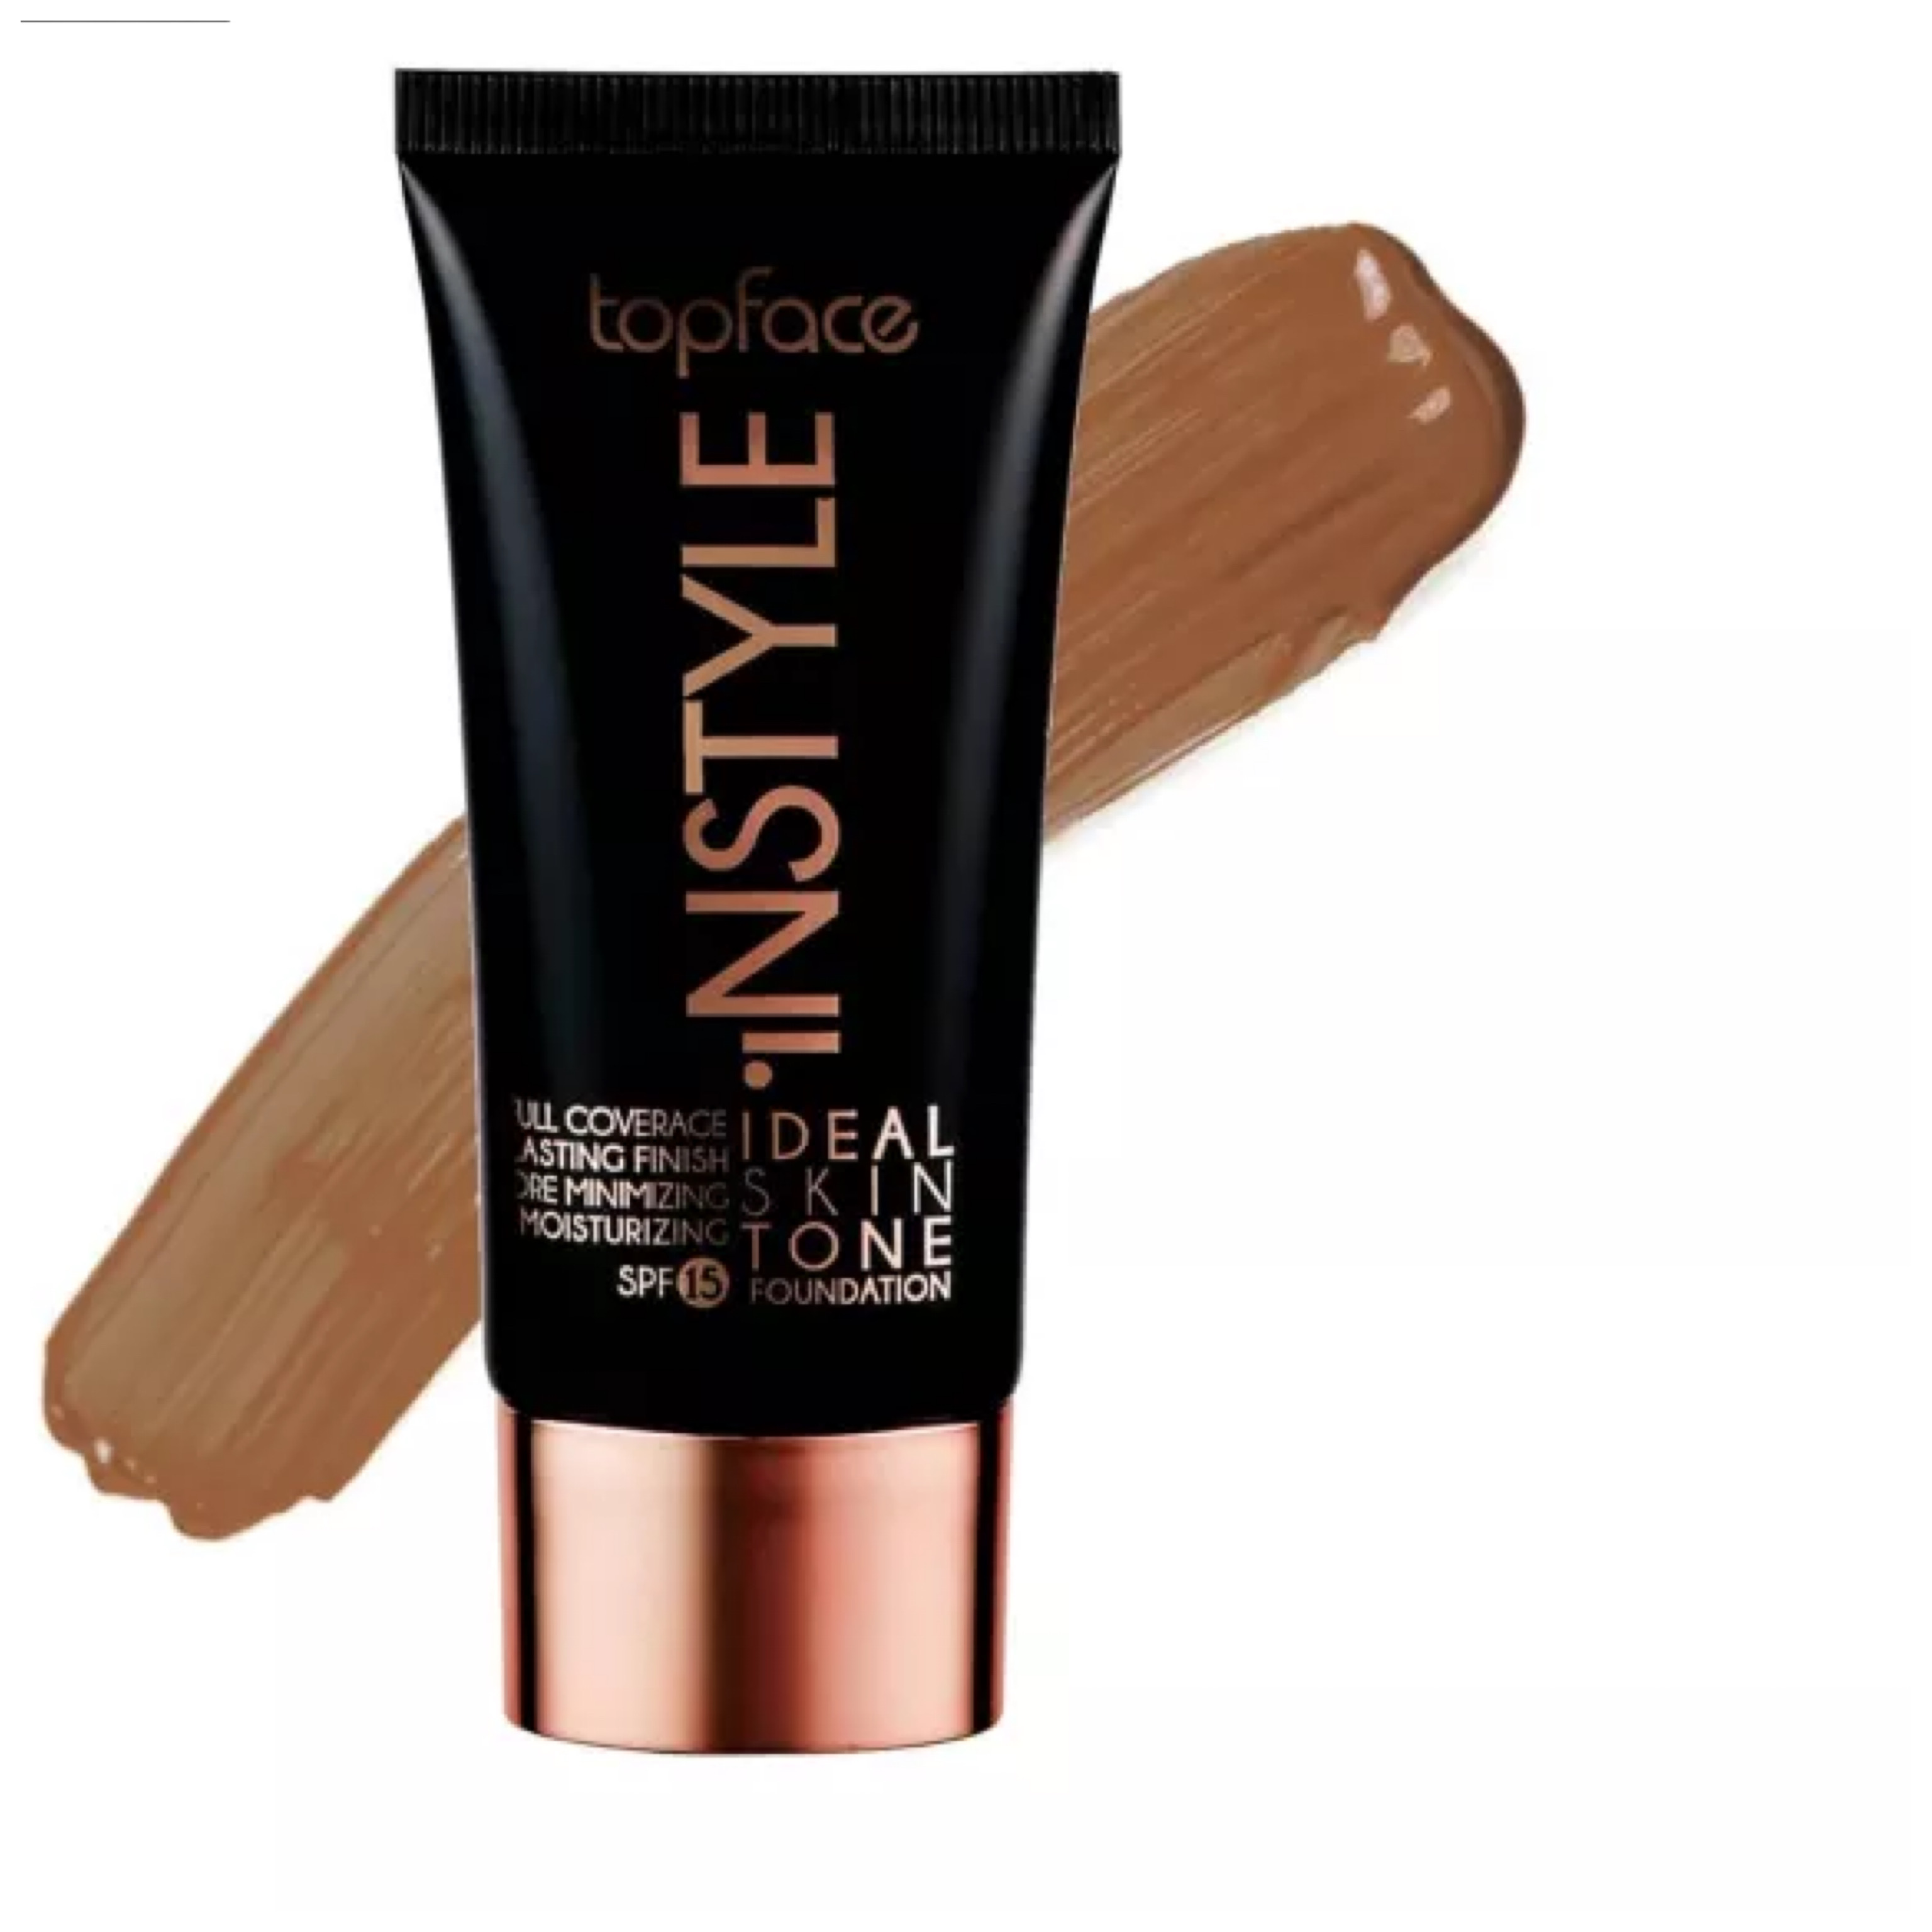 Topface Instyle Full Cover Ideal Skin Tone Foundation